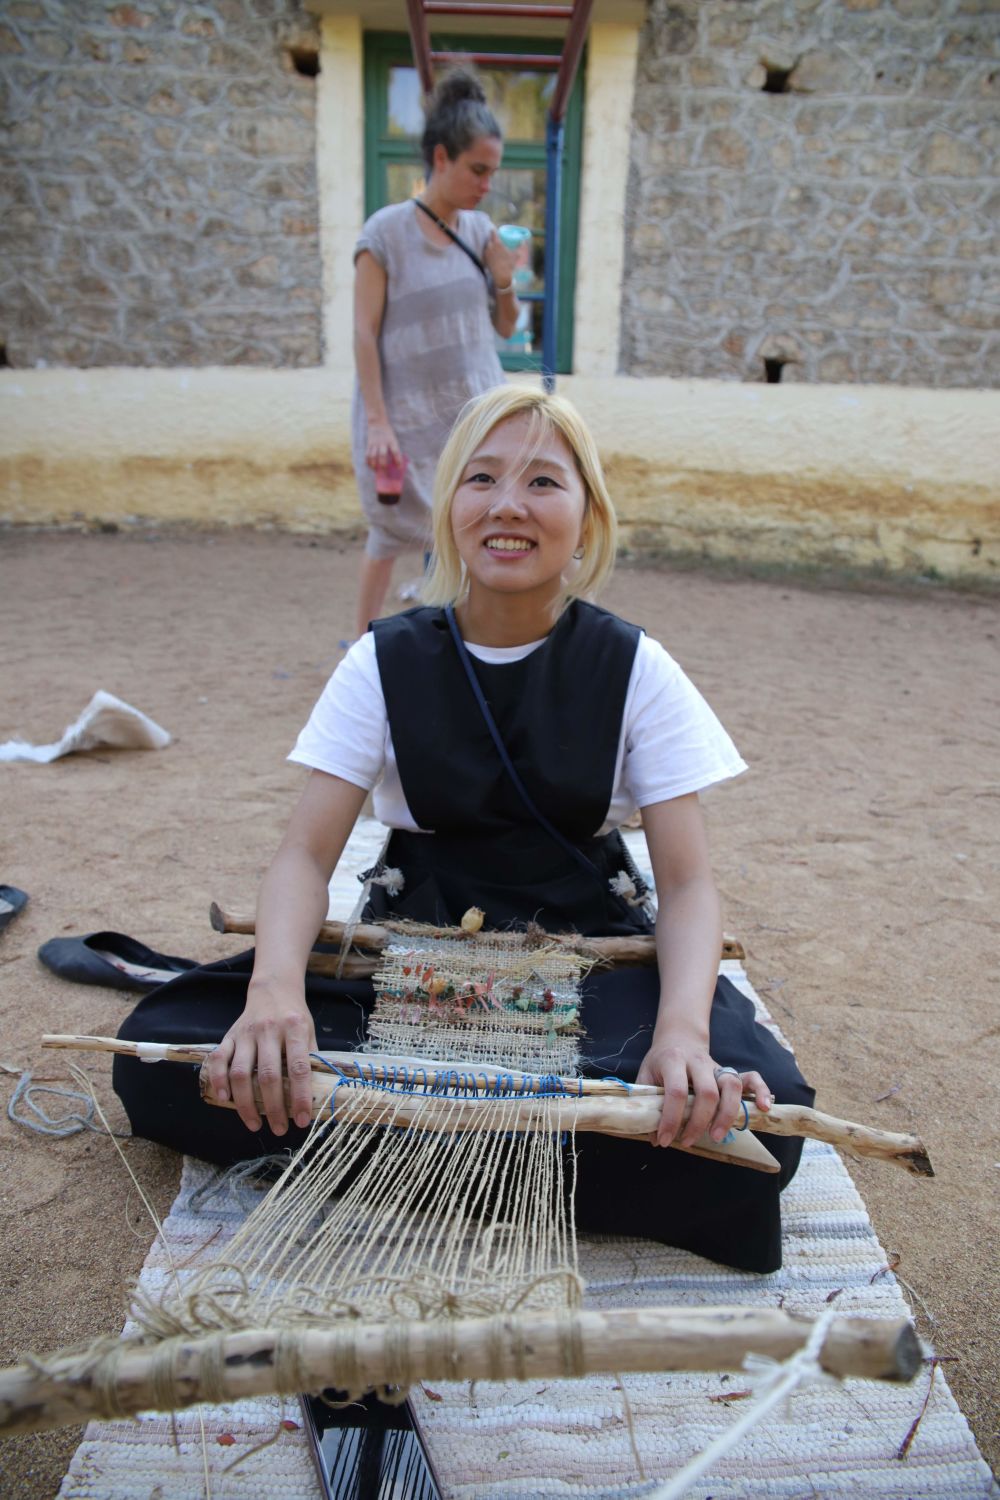 Chil weaving using a hand loom